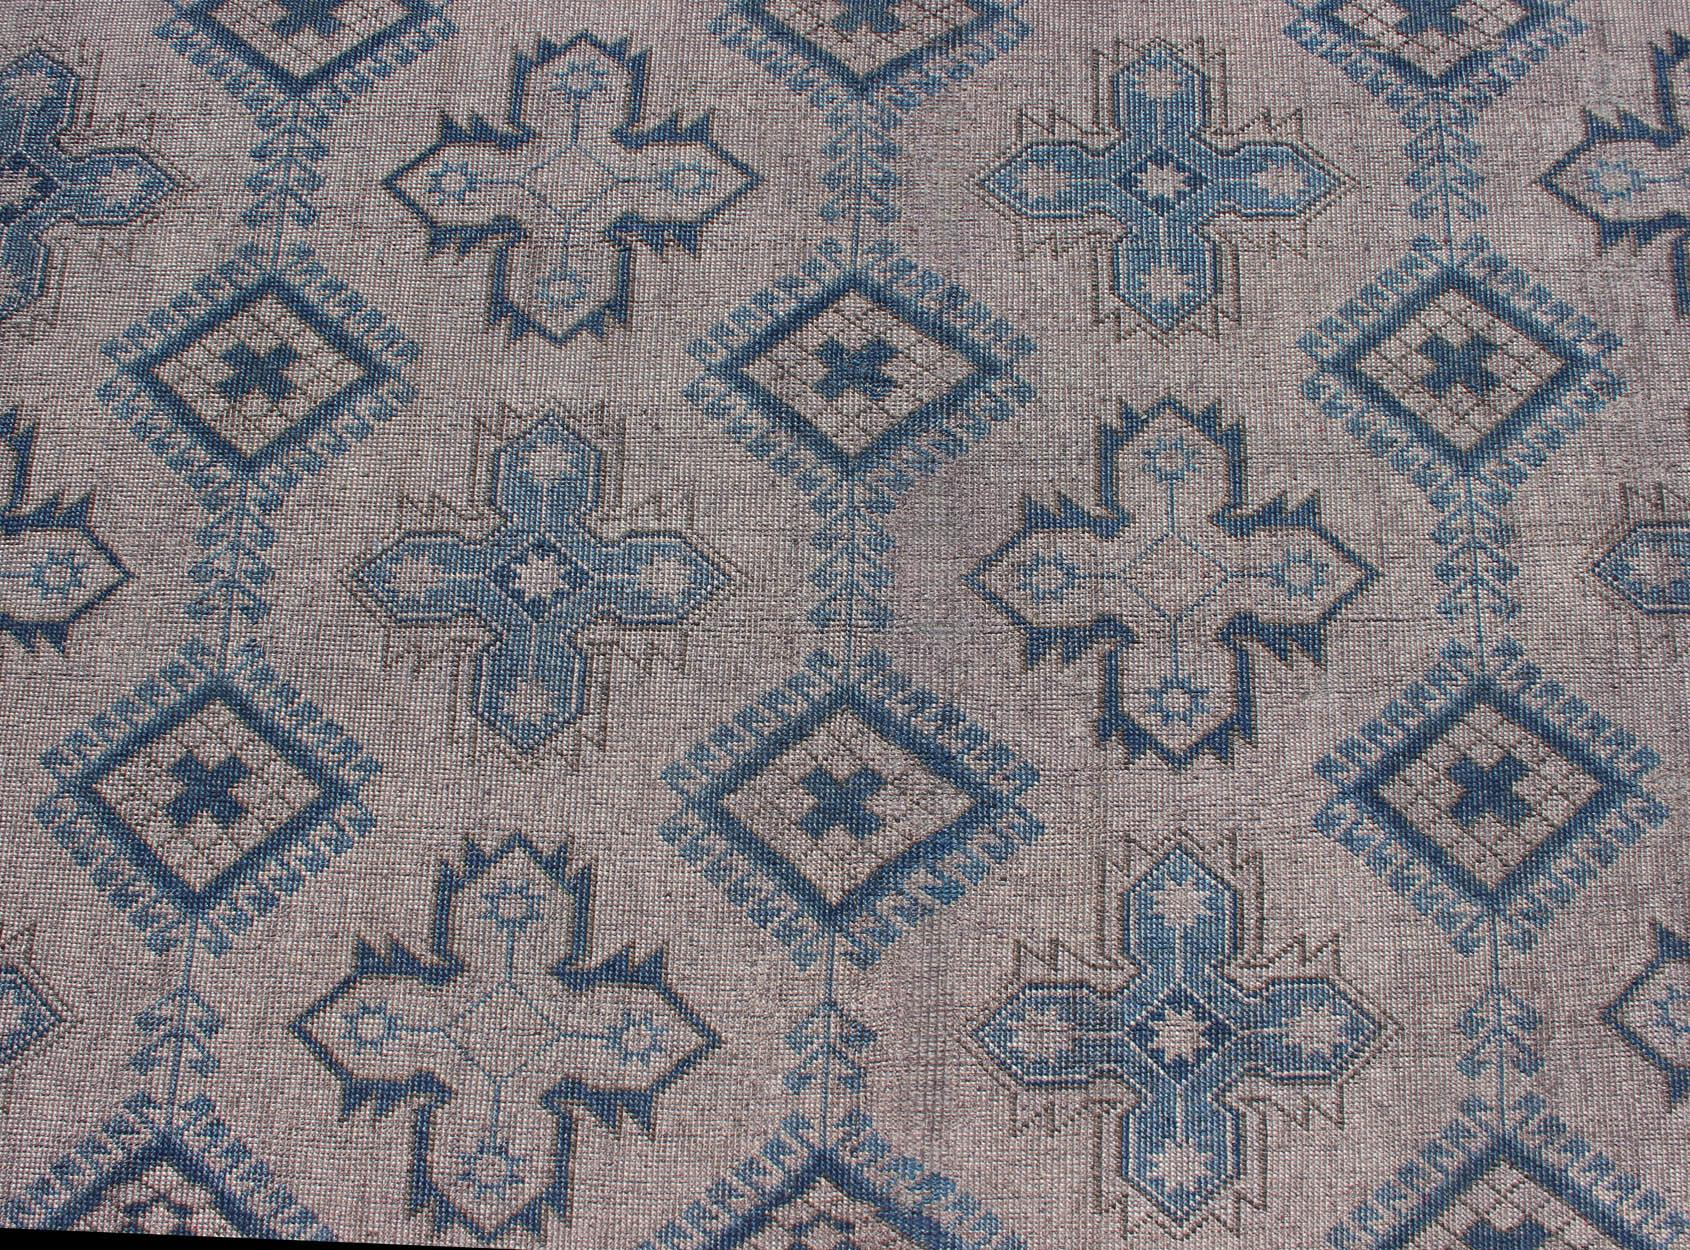 Vintage Turkish Oushak Rug in Blue with All-Over Geometric Design in Gray & Blue For Sale 5